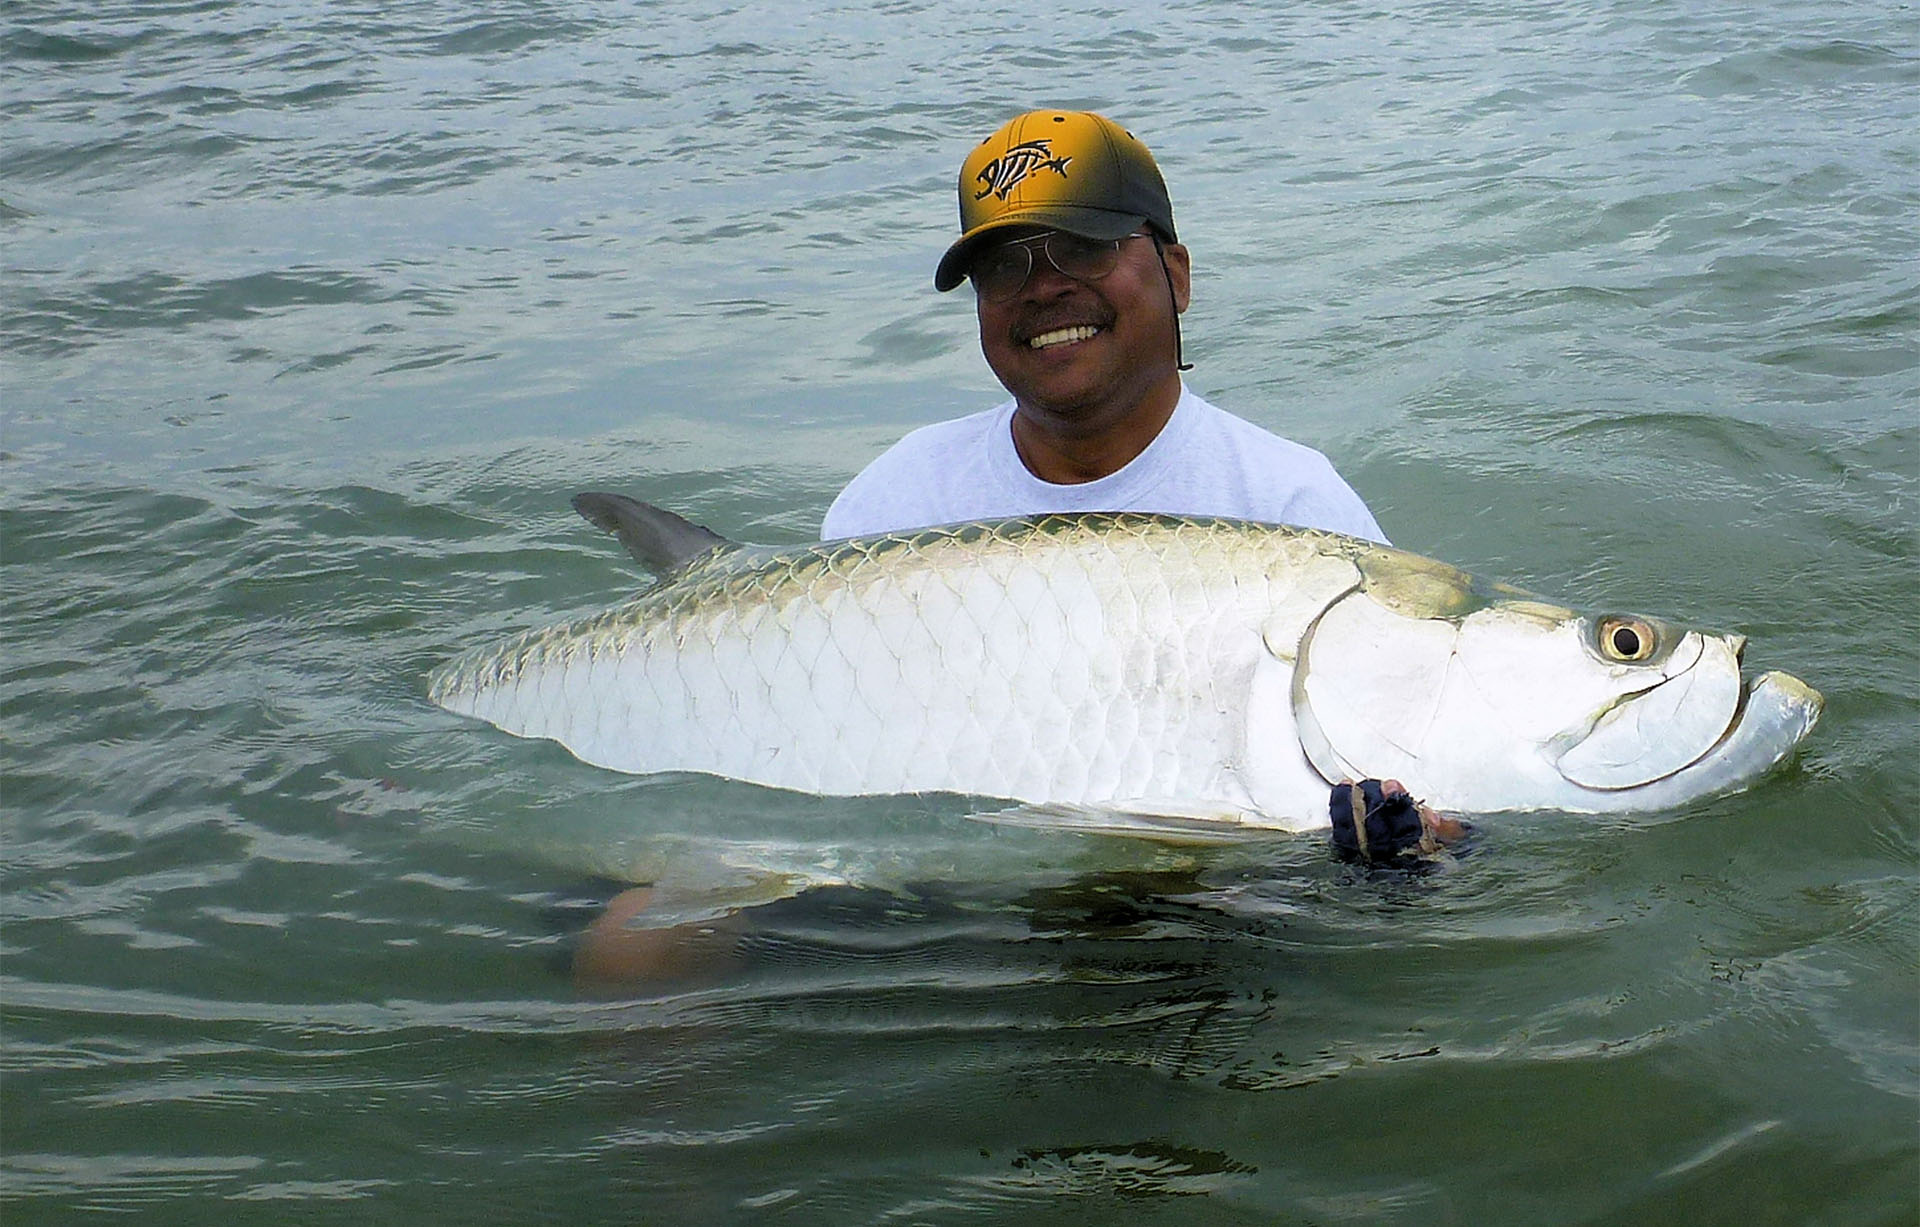 Pon my soul: Fly fishing for whopping tarpon in the Florida Keys